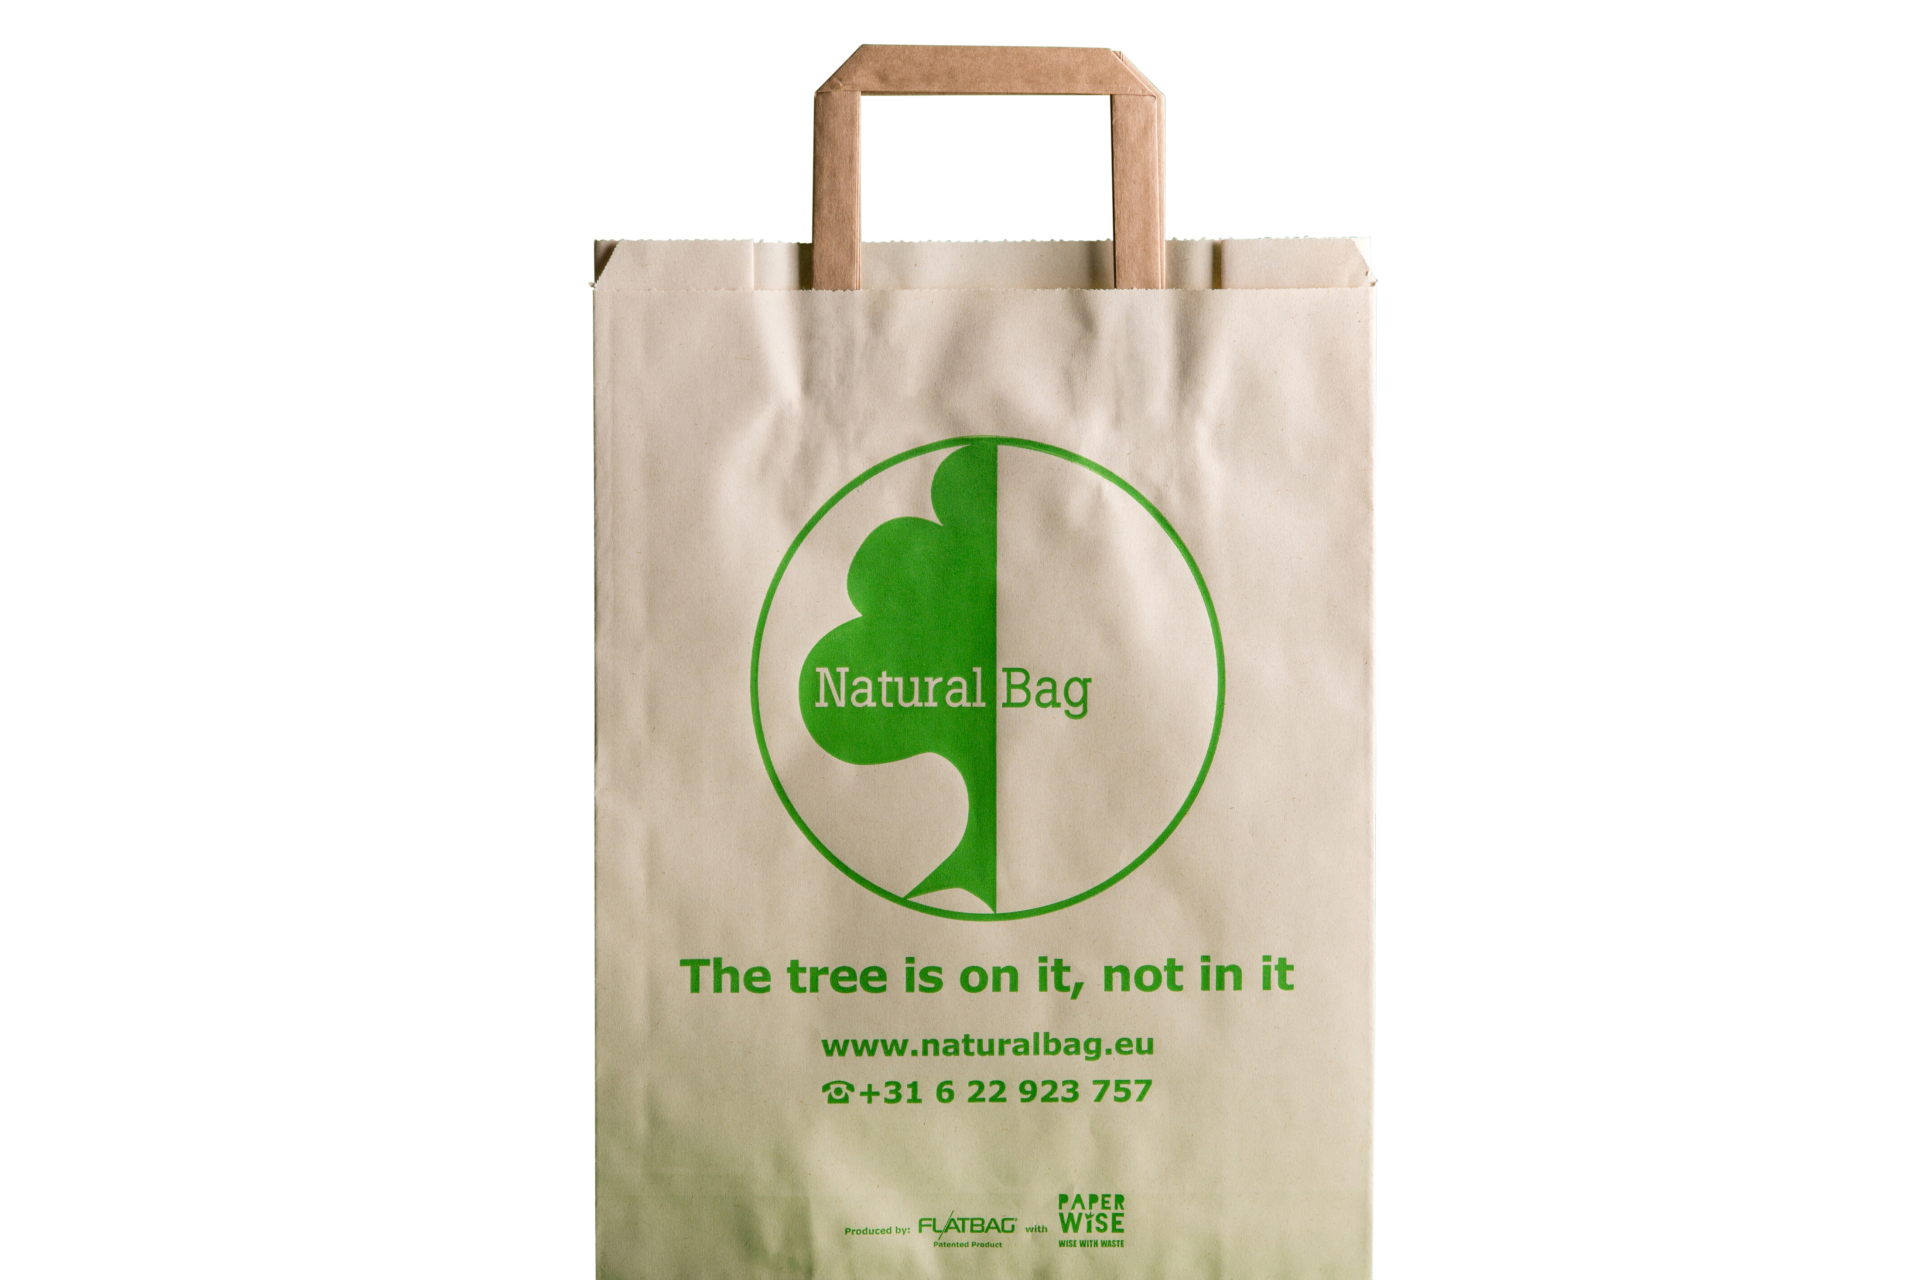 wp content uploads  0    0  organic paper board treefree bag paperbag flatbag sustainable packaging naturalbag 4c